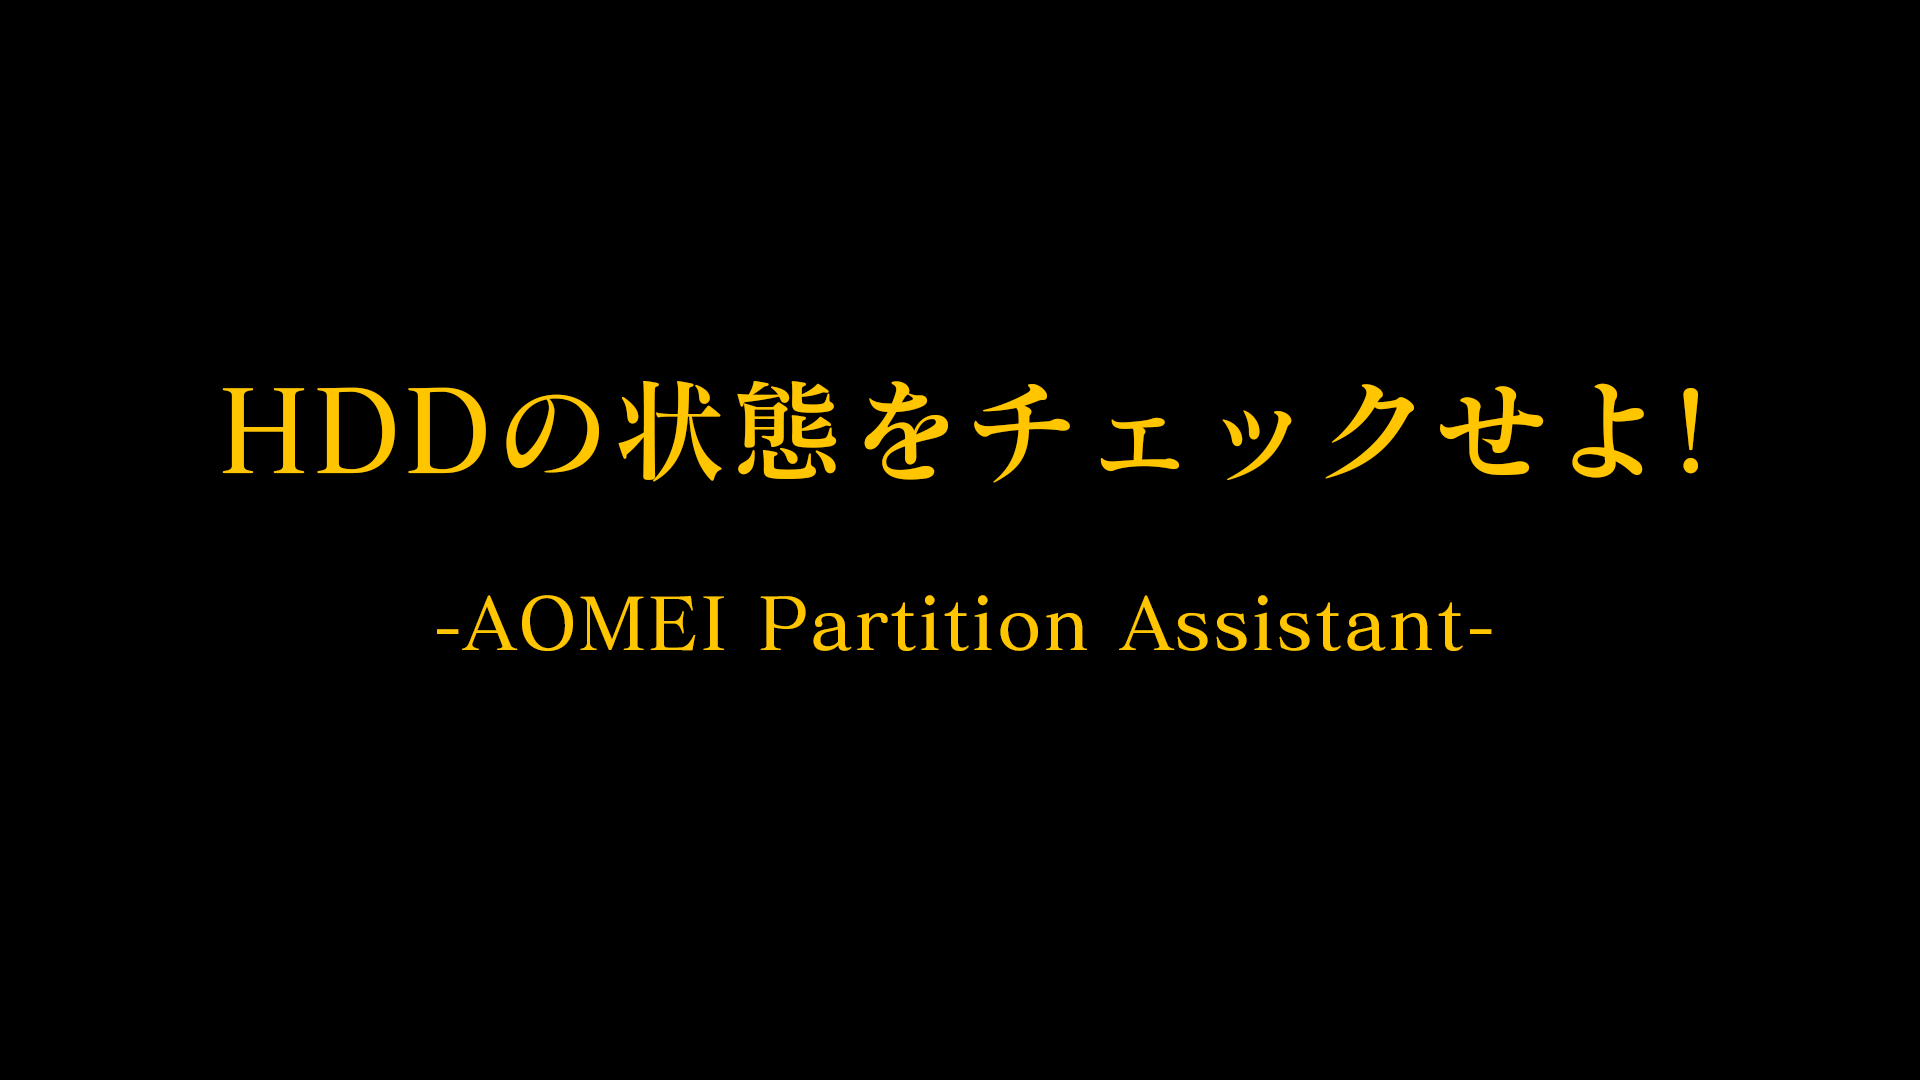 APAHD - AOMEI Partition AssistantでHDDの健康度を調査してみた。